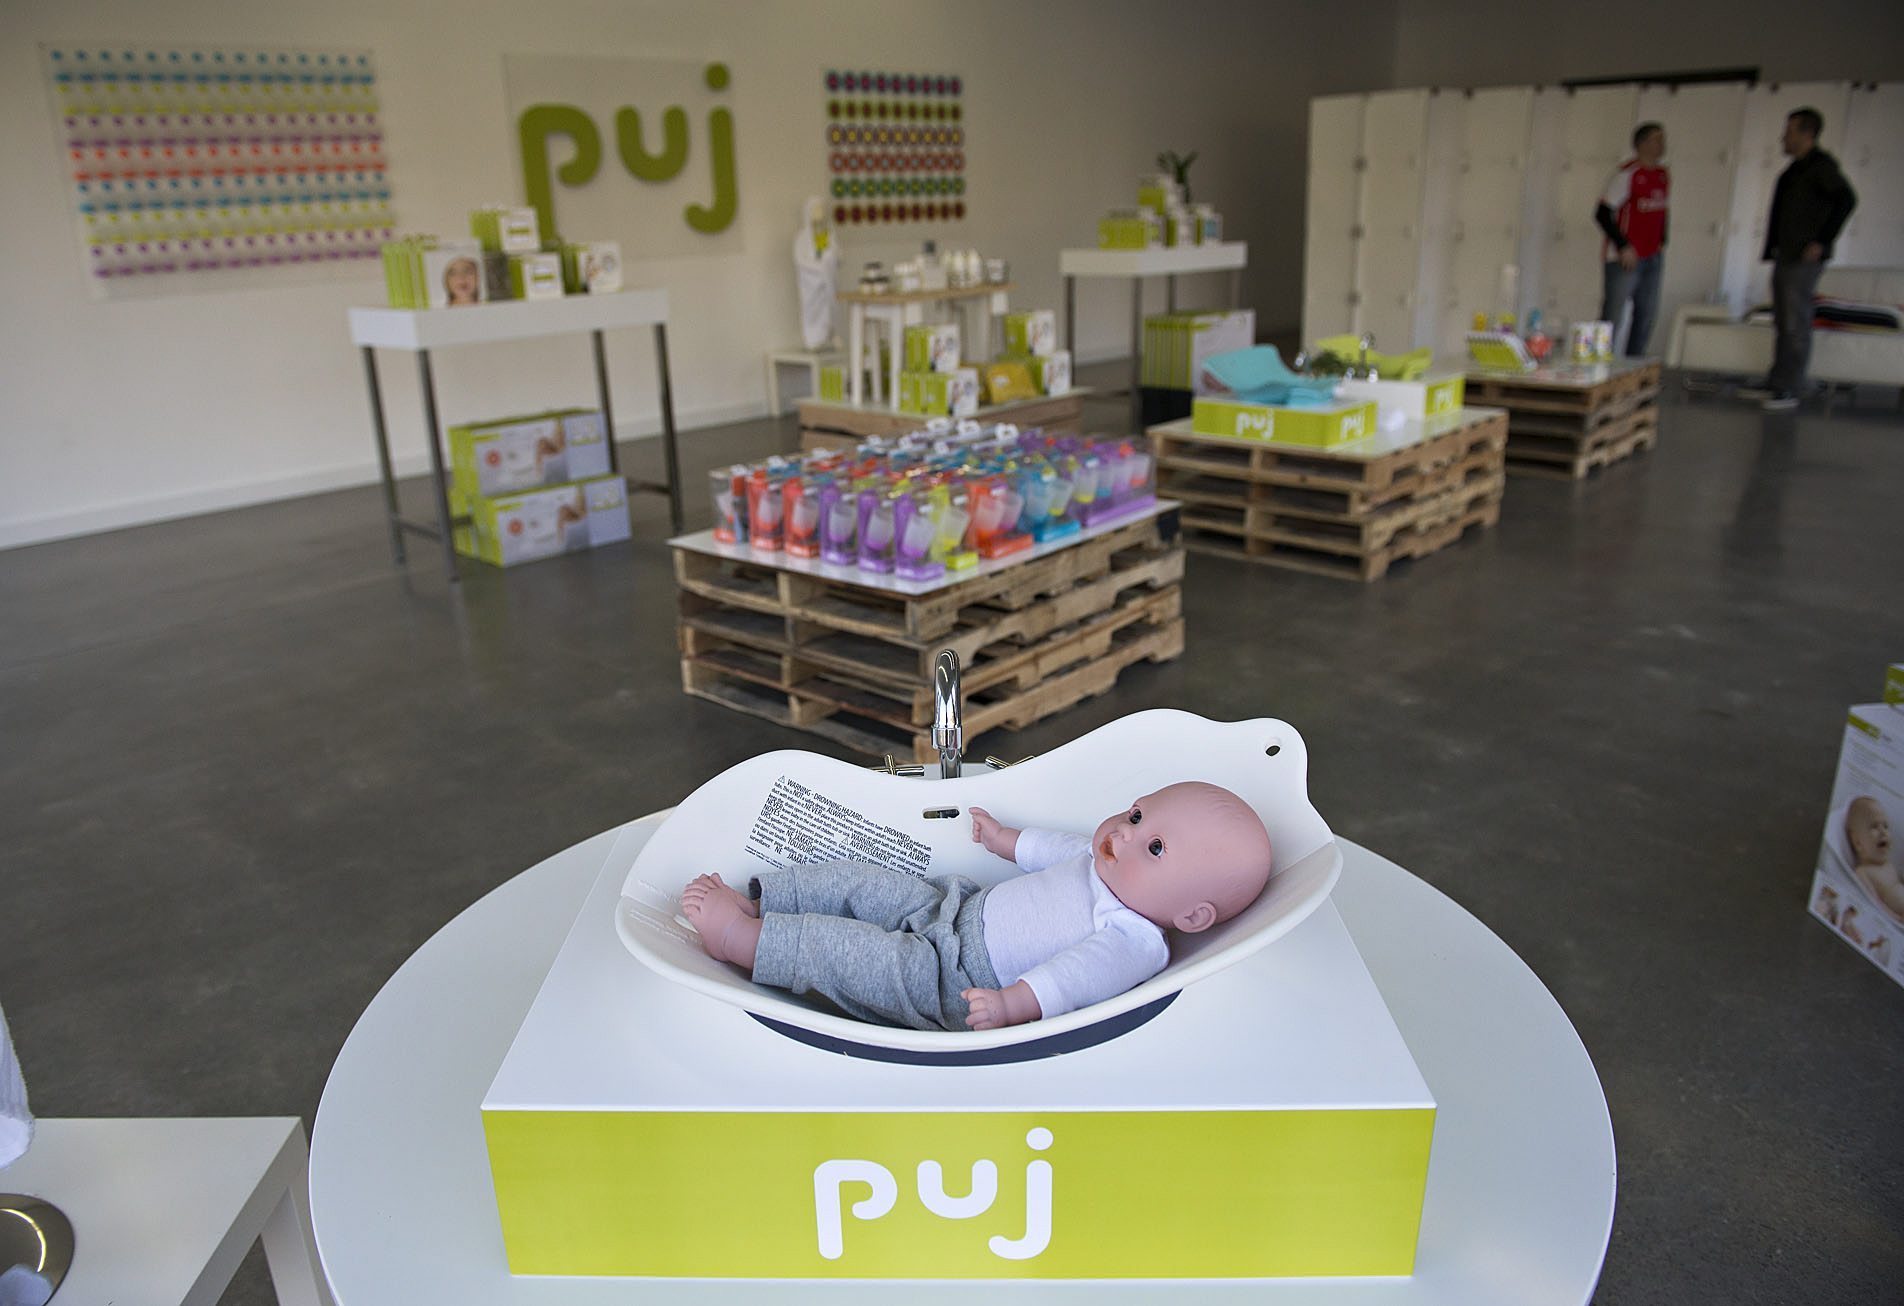 The infant products company Puj was launched on the strength of the Puj Tub, a soft foam tub that conforms to the shape of most sinks. The tub is among the products now in display at the company&#039;s newly developed showroom and retail store at 301 W. 11th St. in Vancouver.